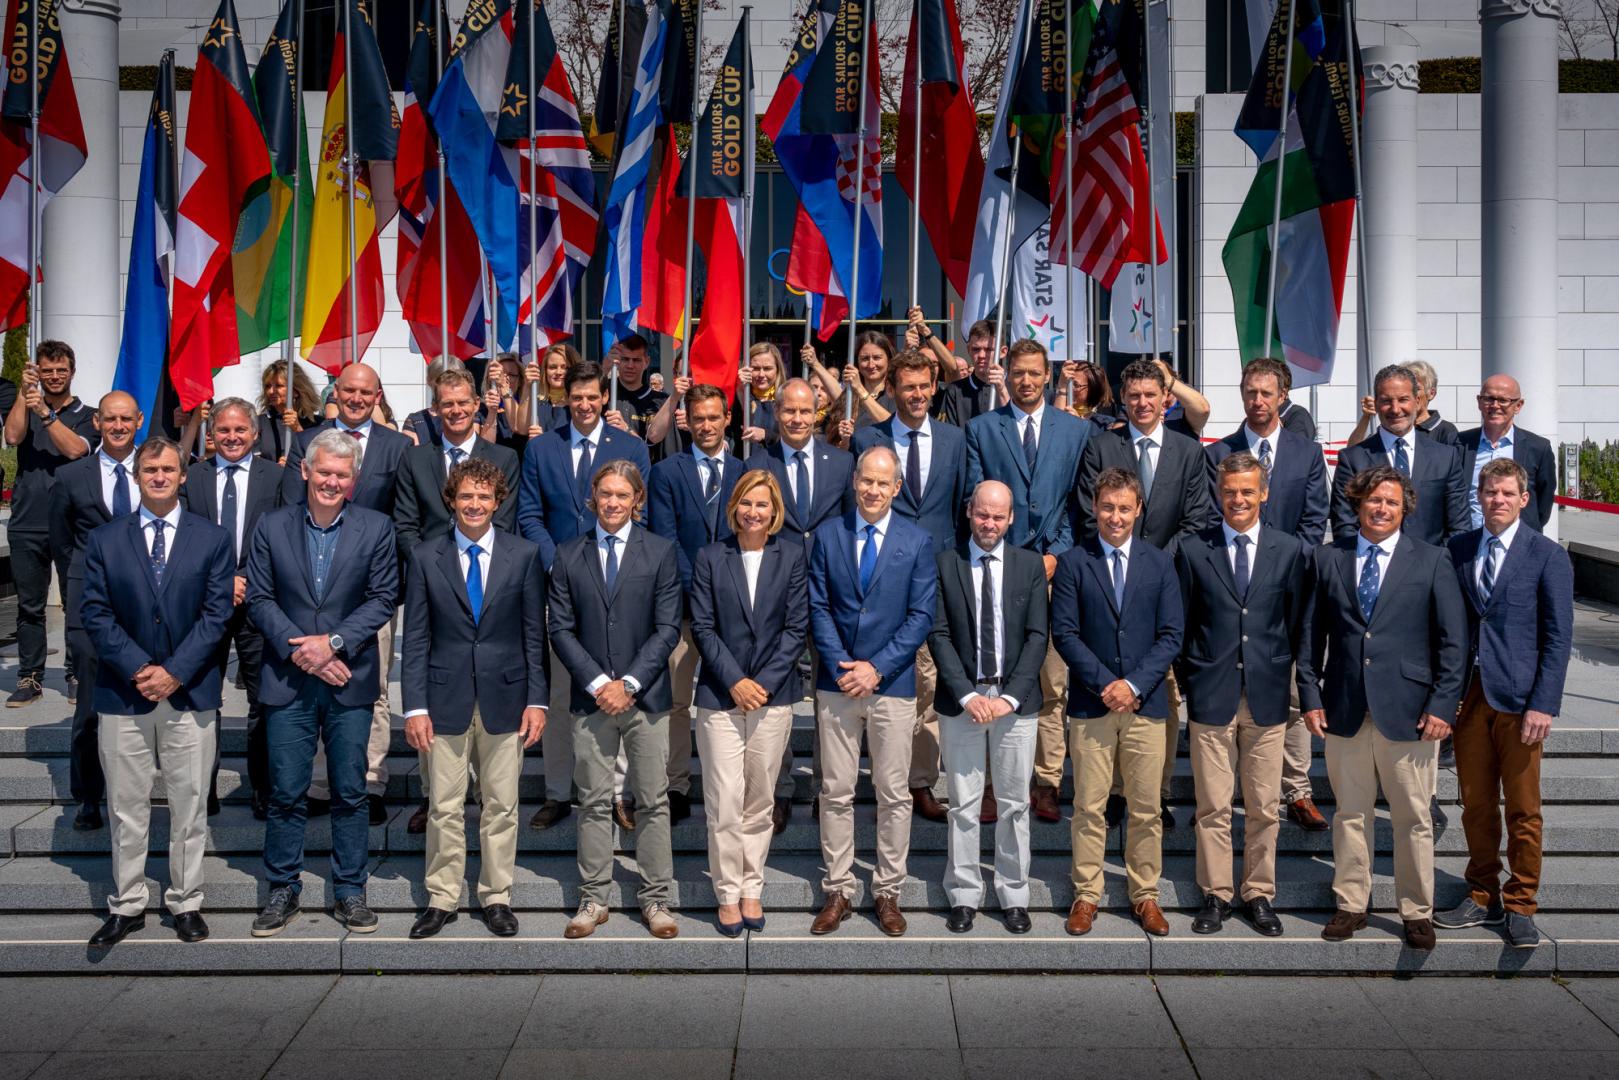 The first 20 nations presented today at the Olympic Museum in Lausanne